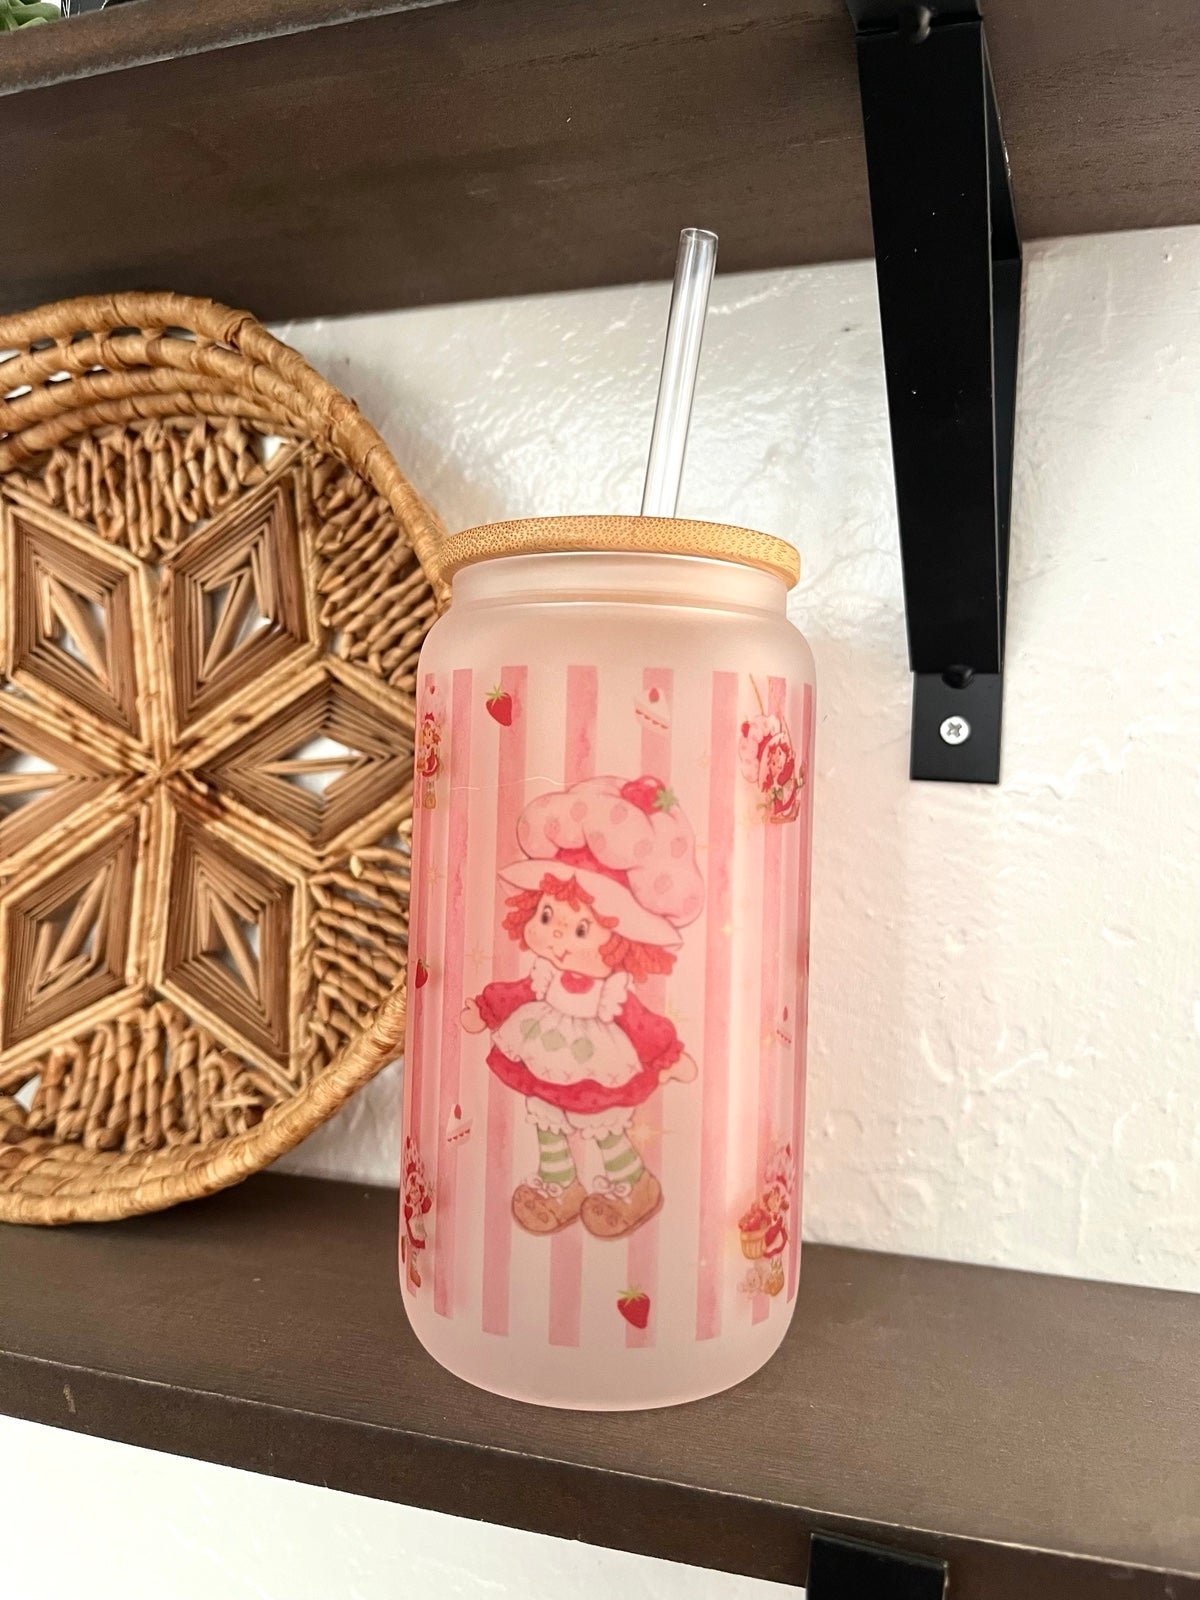 Frosted Glass Cup Strawberry Shortcake Design N7wgGo9LJ